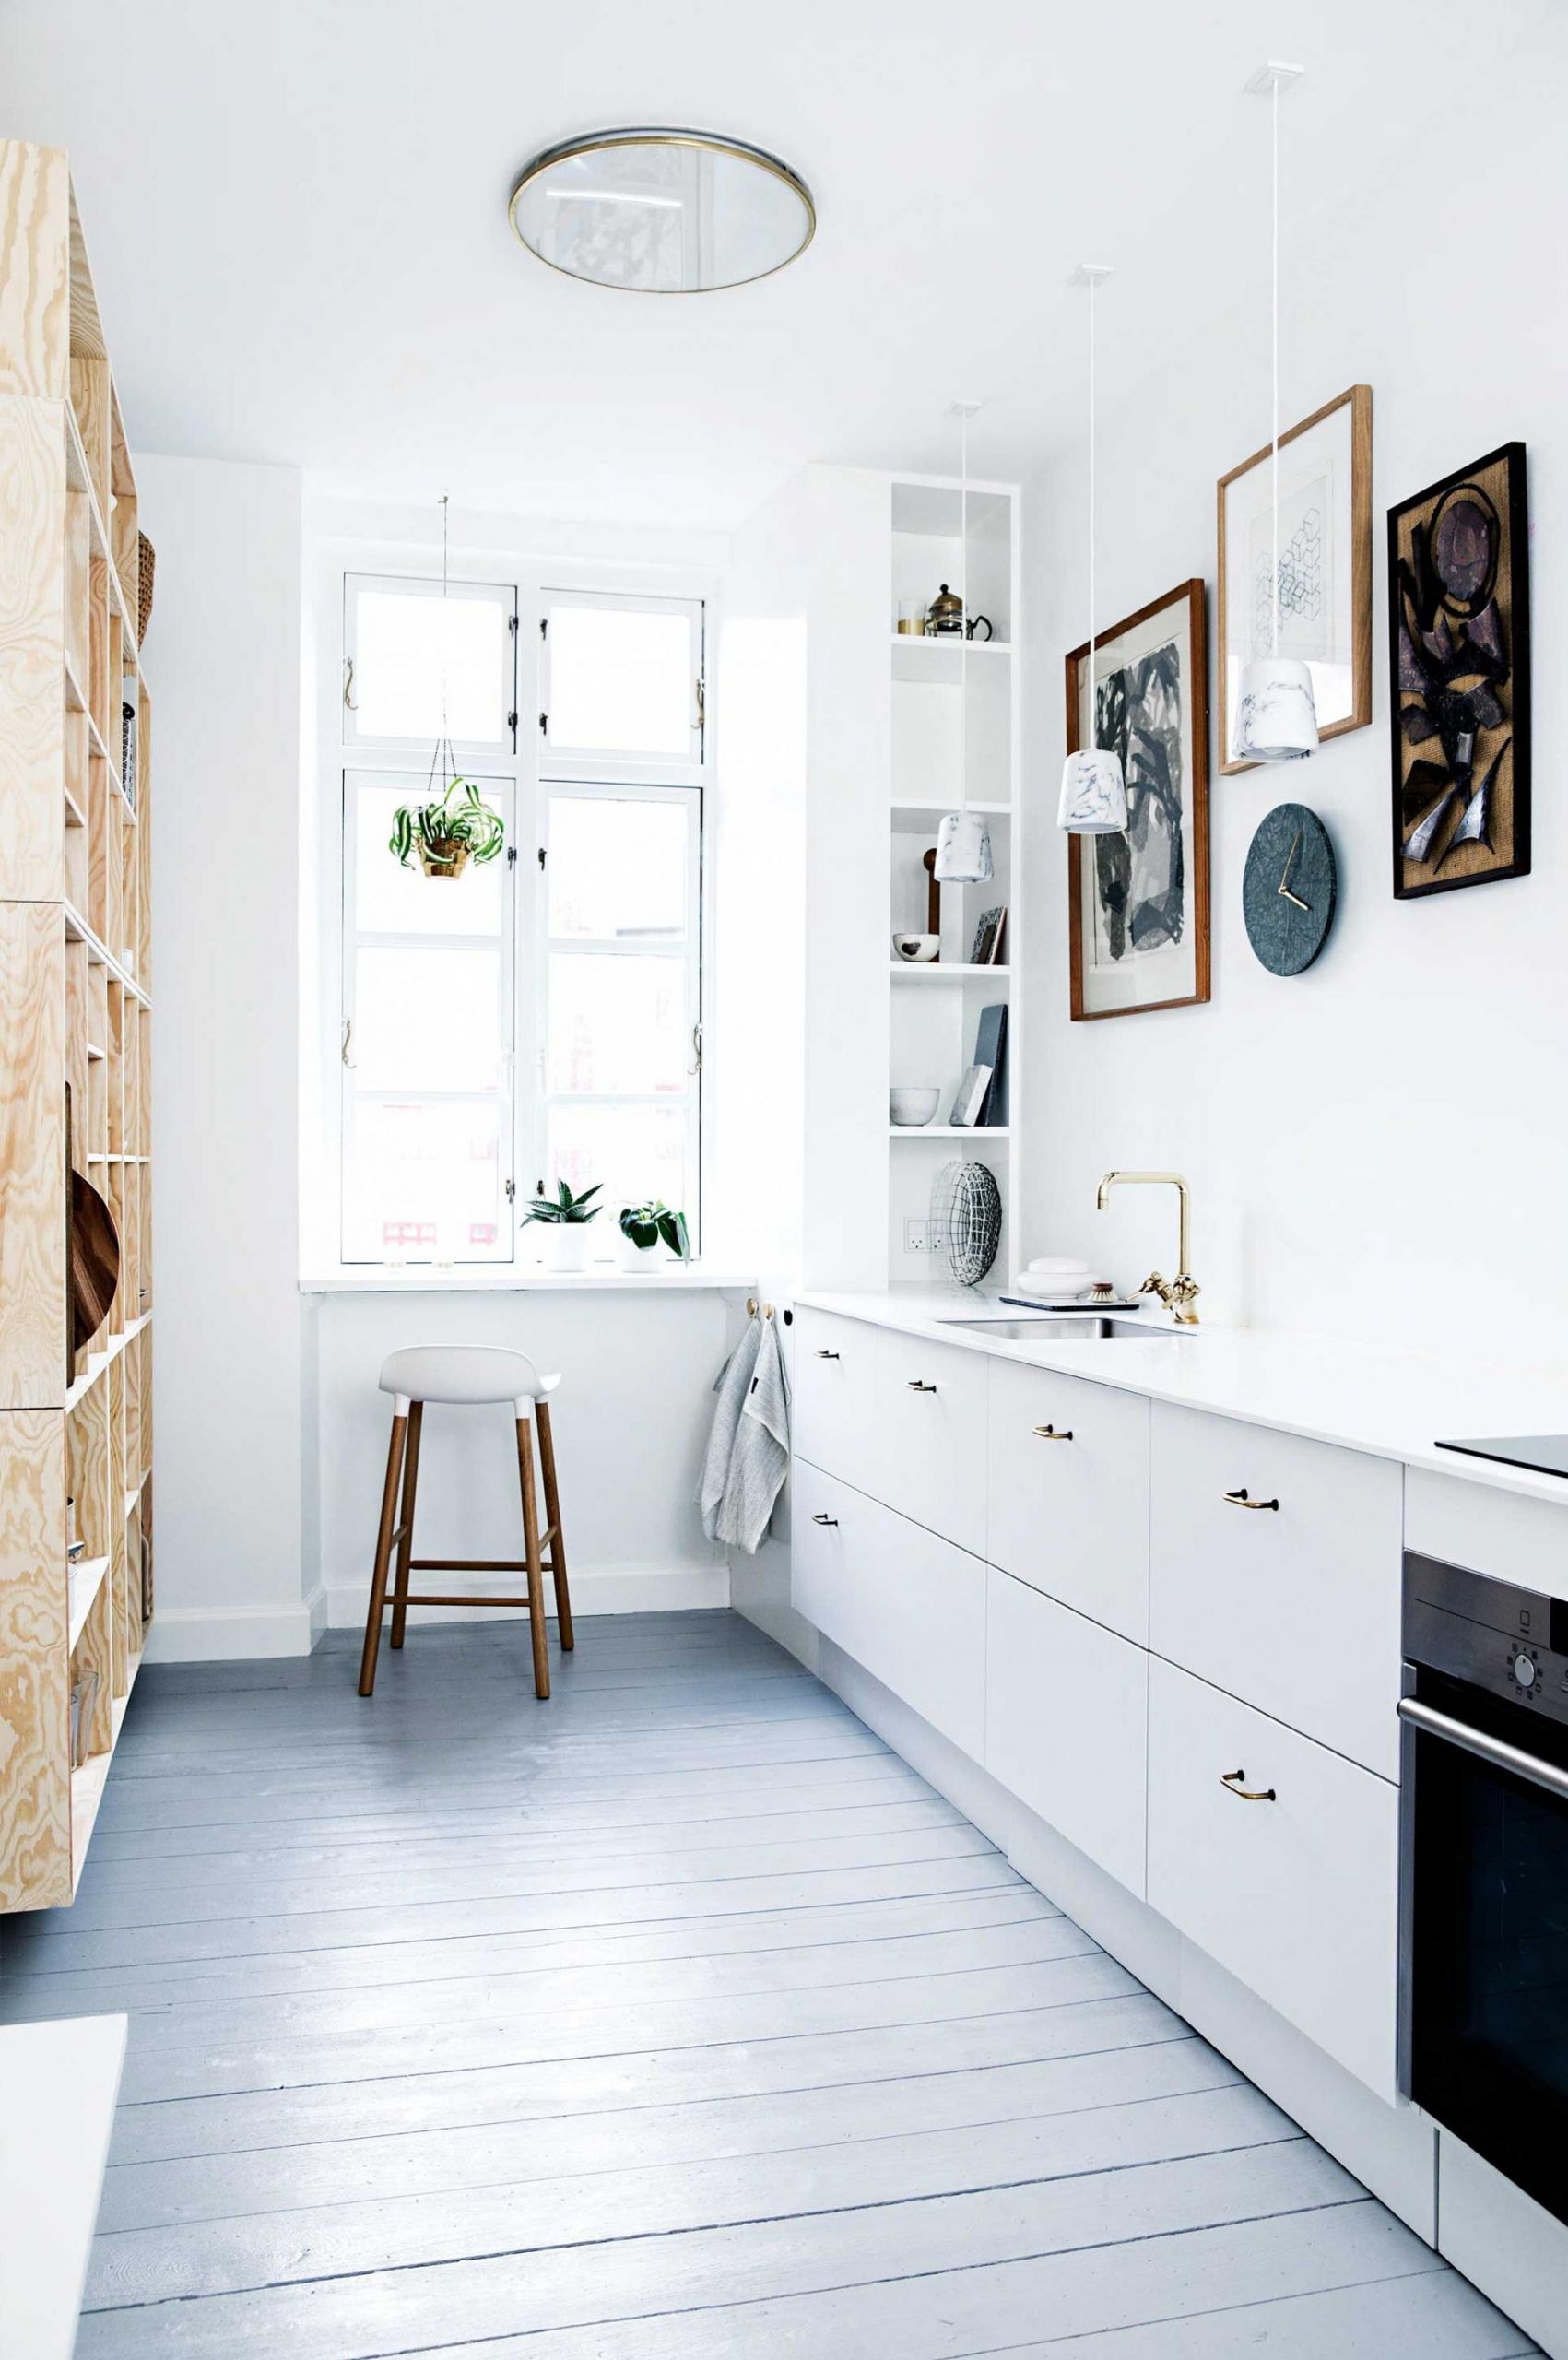 Small Kitchen Open Shelving
 decordots Two looks of a small kitchen with amazing open